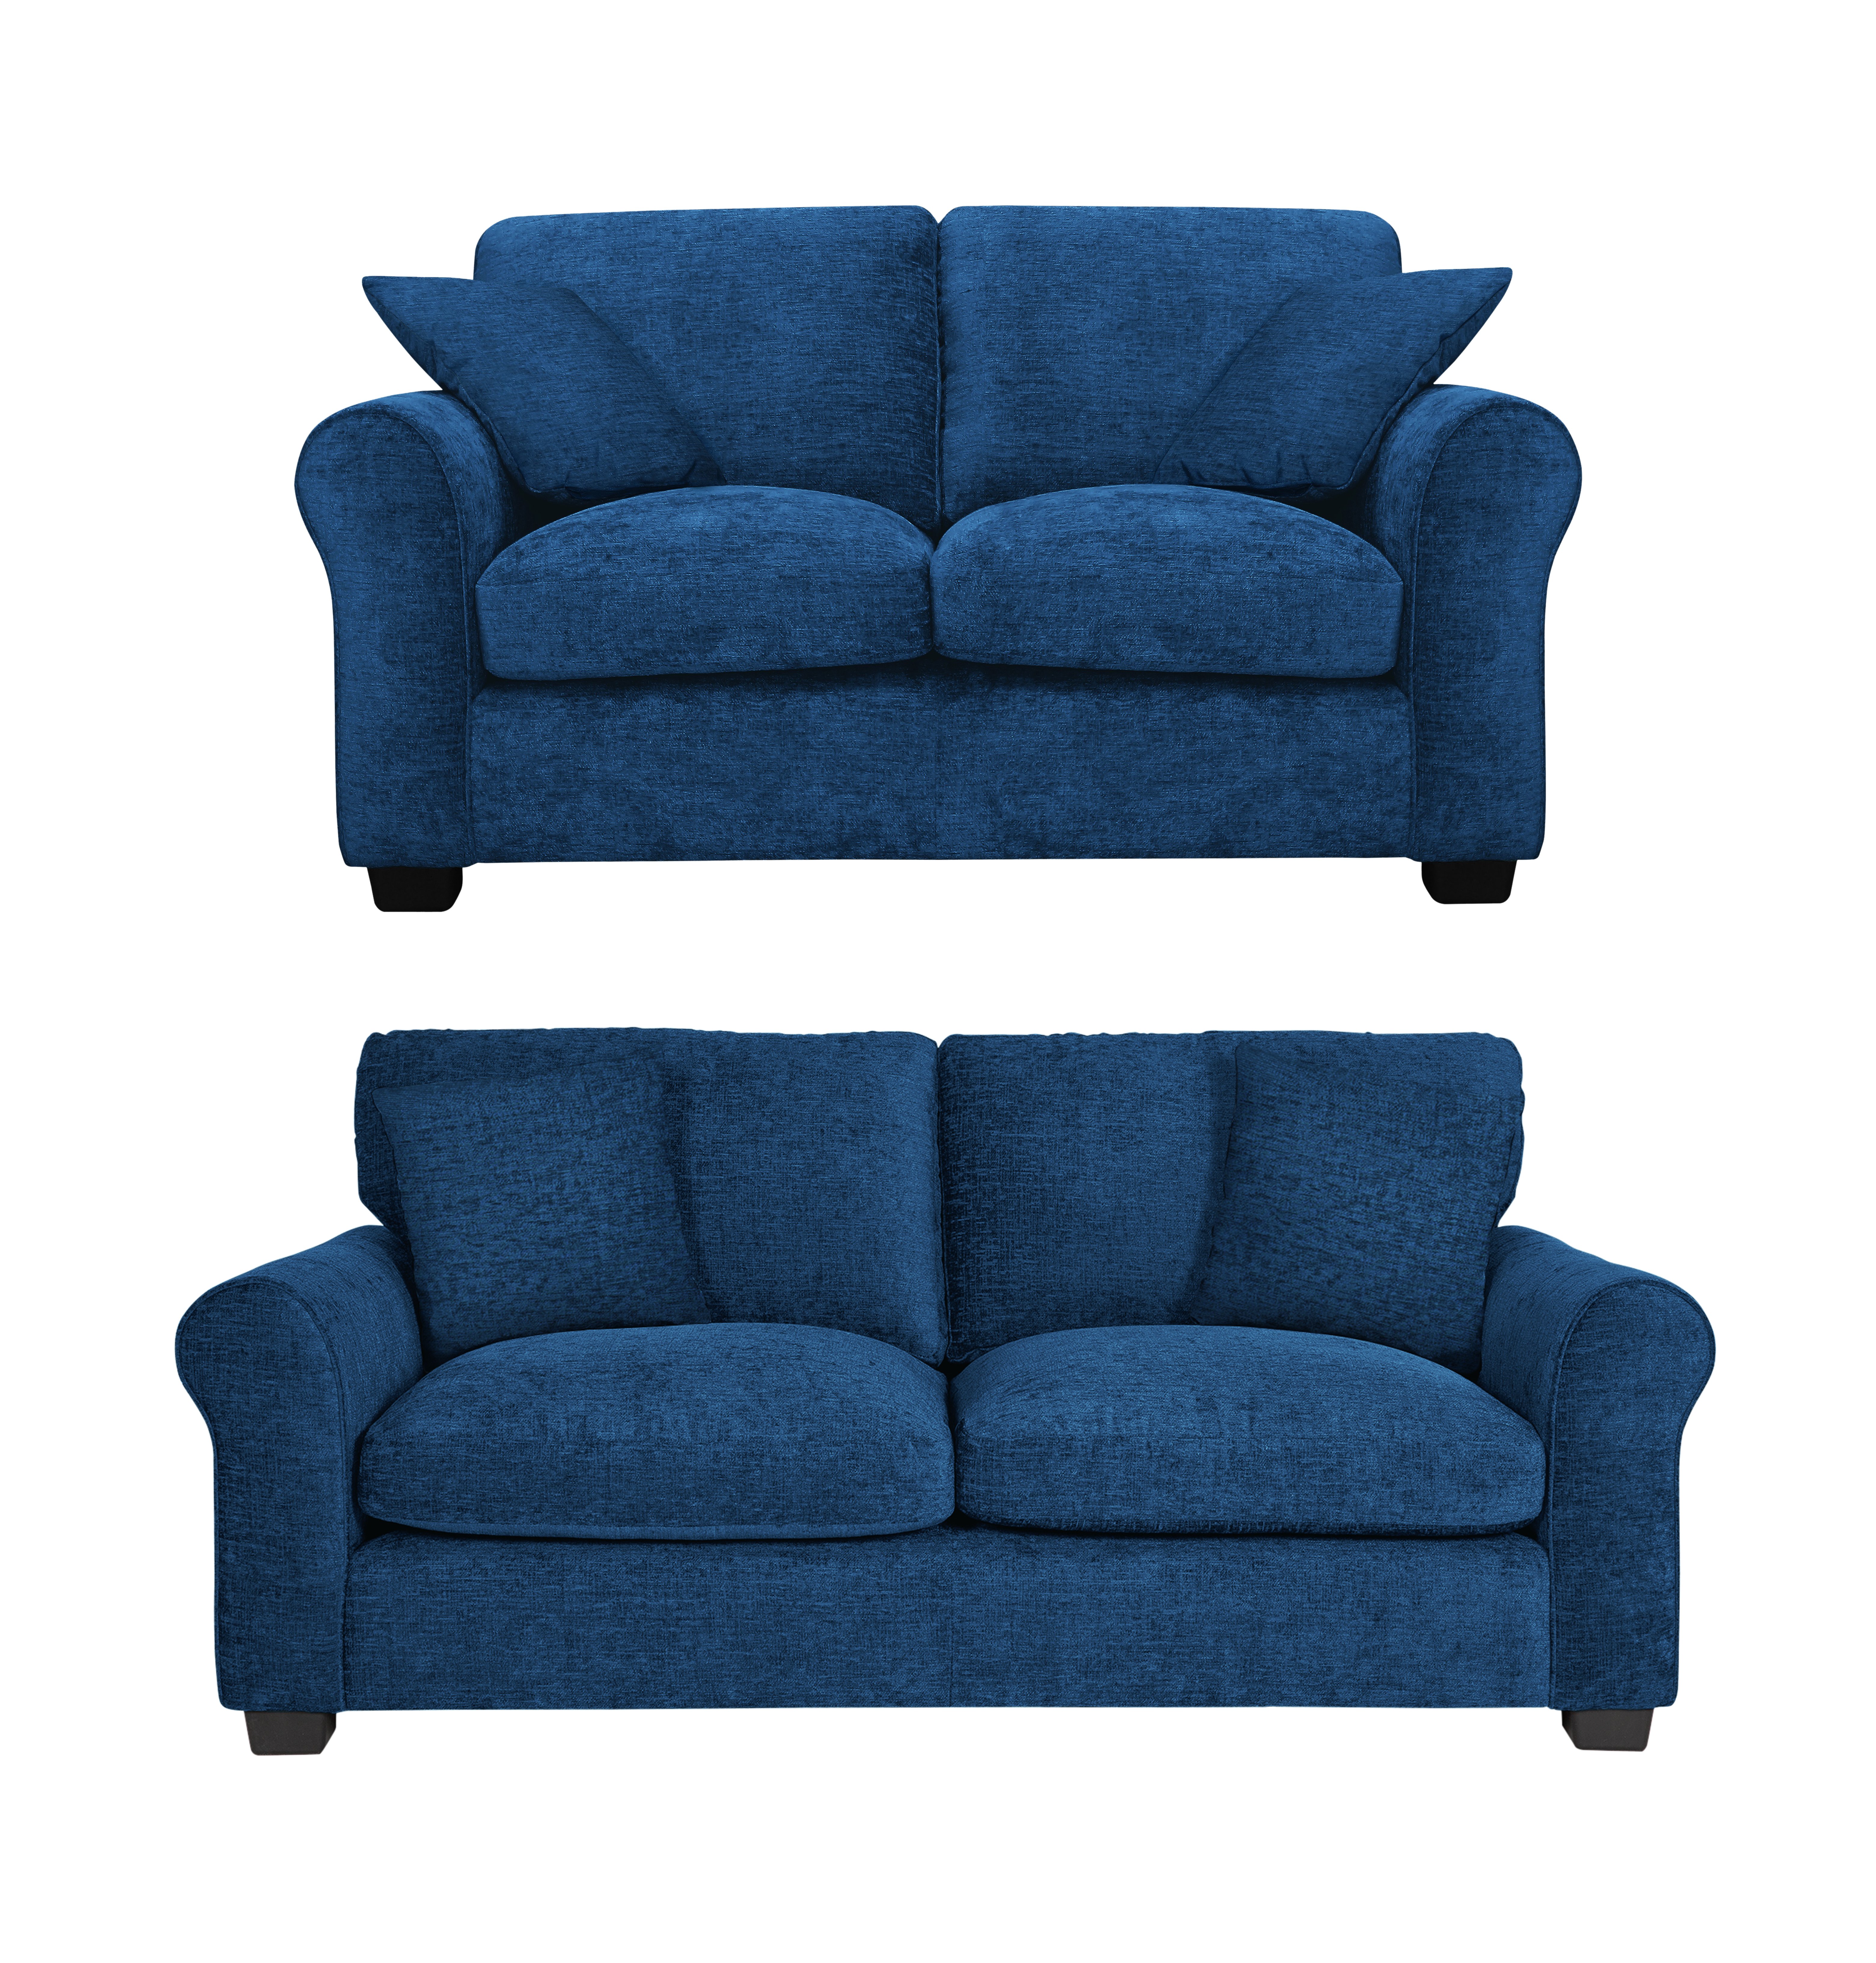 Argos Home Taylor Fabric 2 Seater & 3 Seater Sofa - Blue